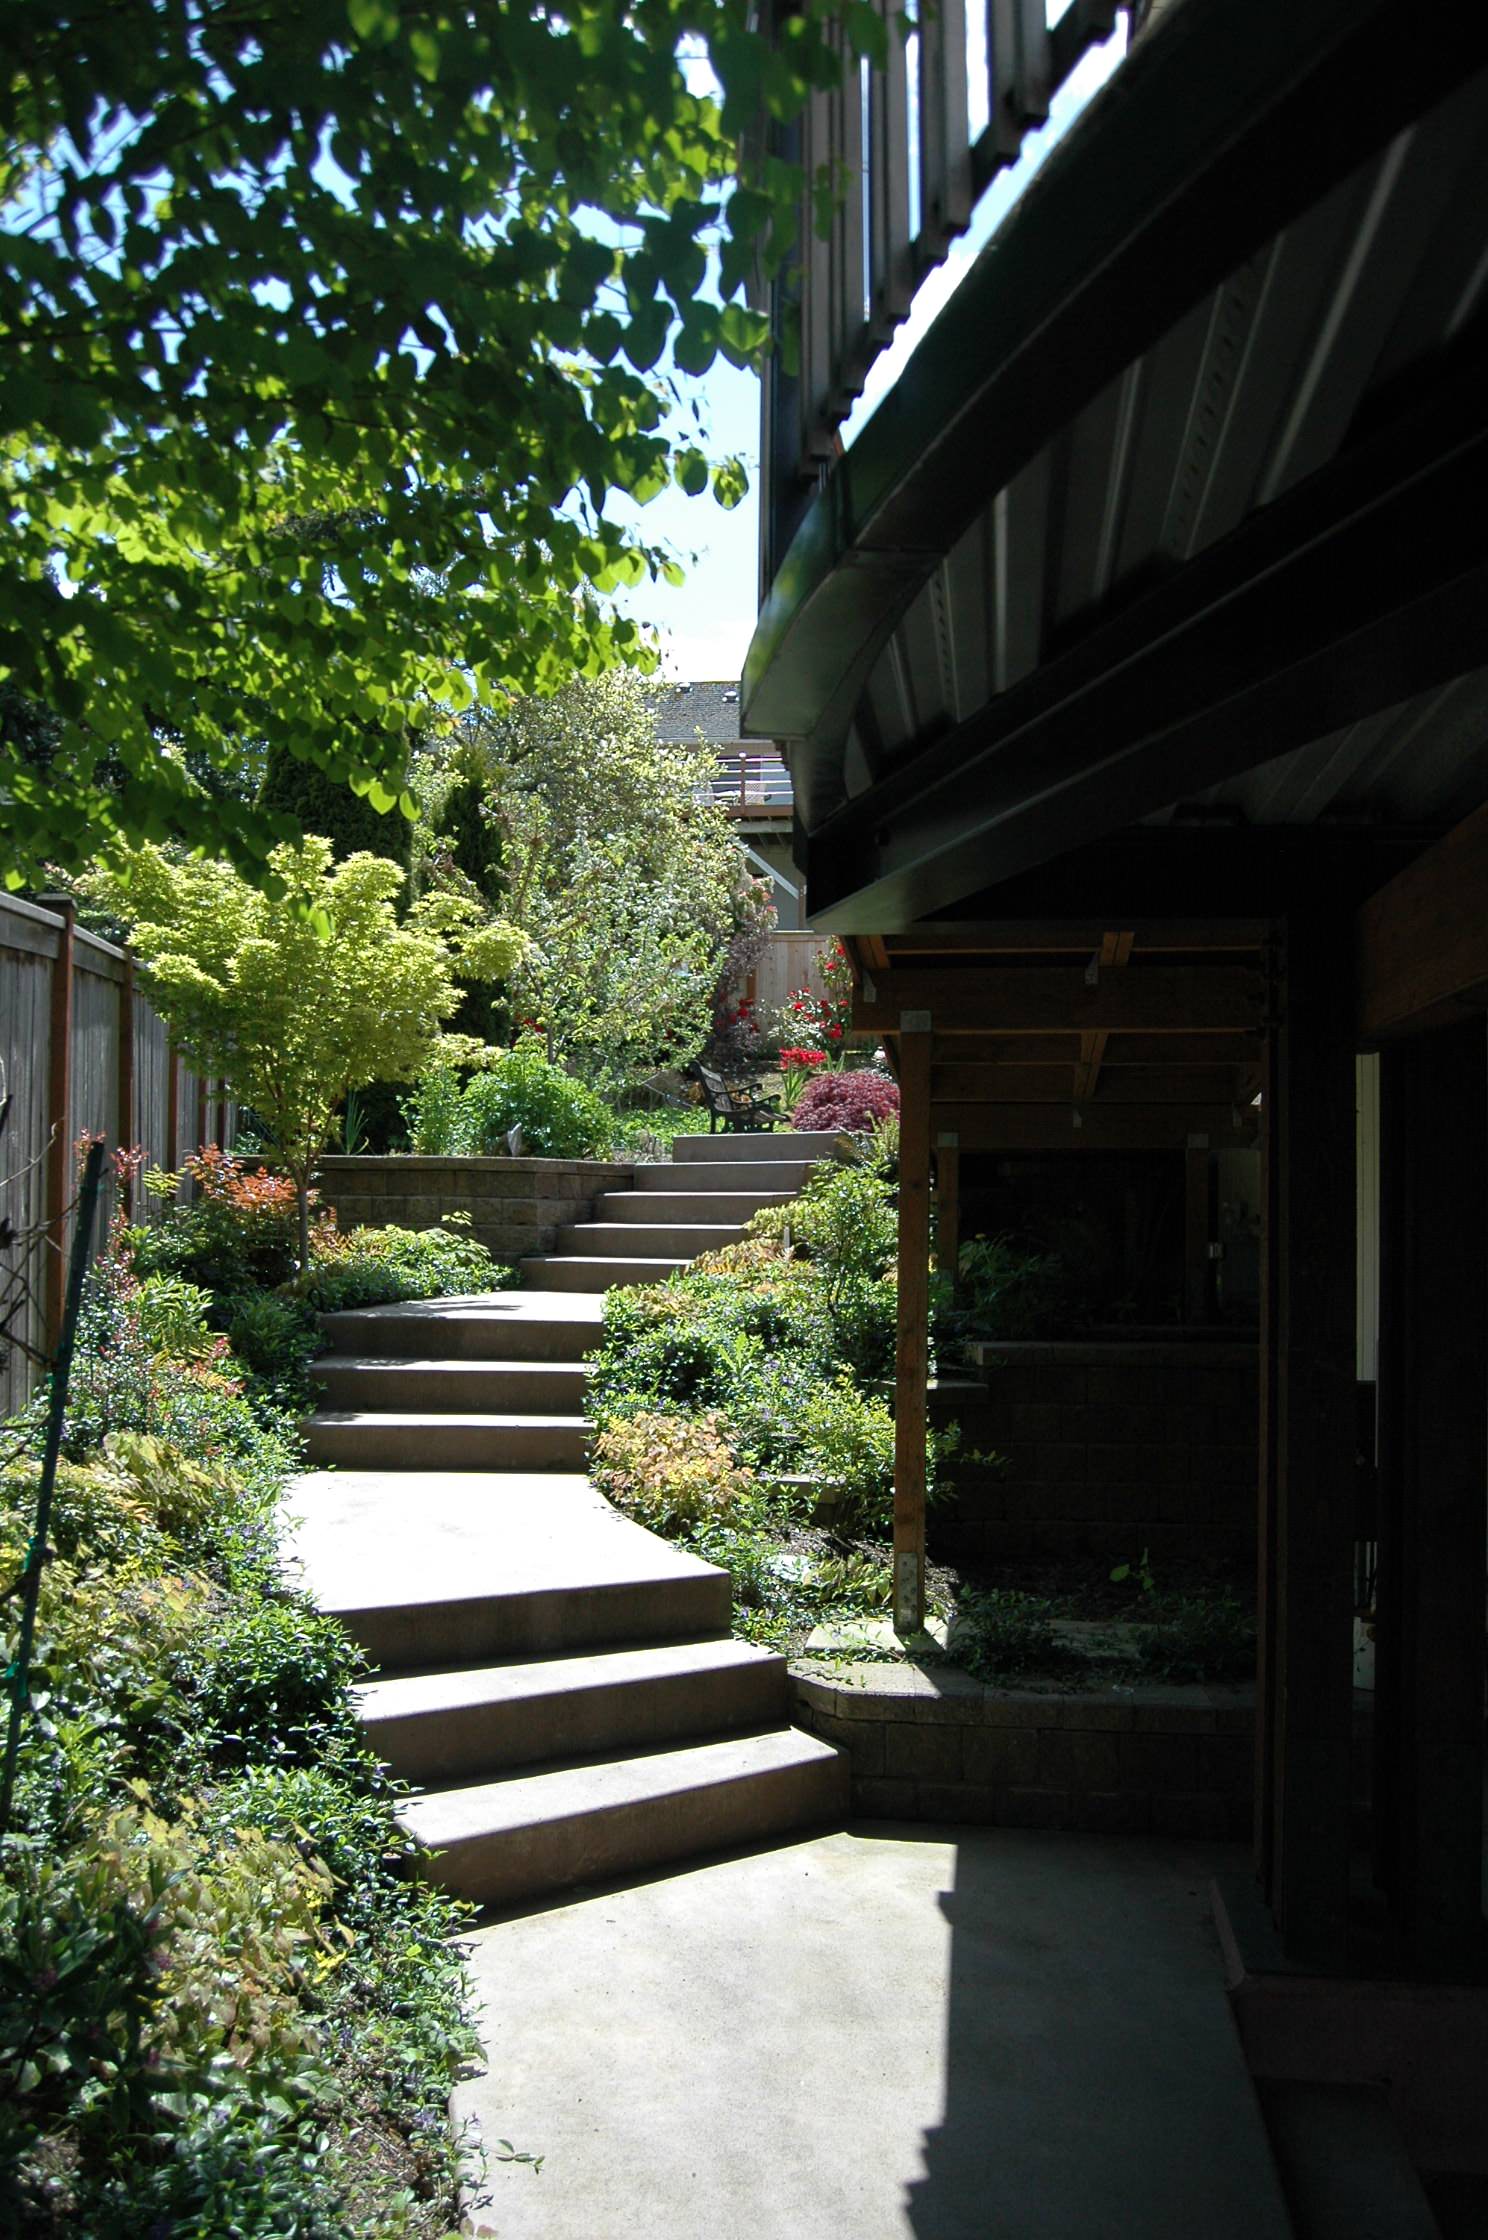 Winding walkway and steps to rear garden